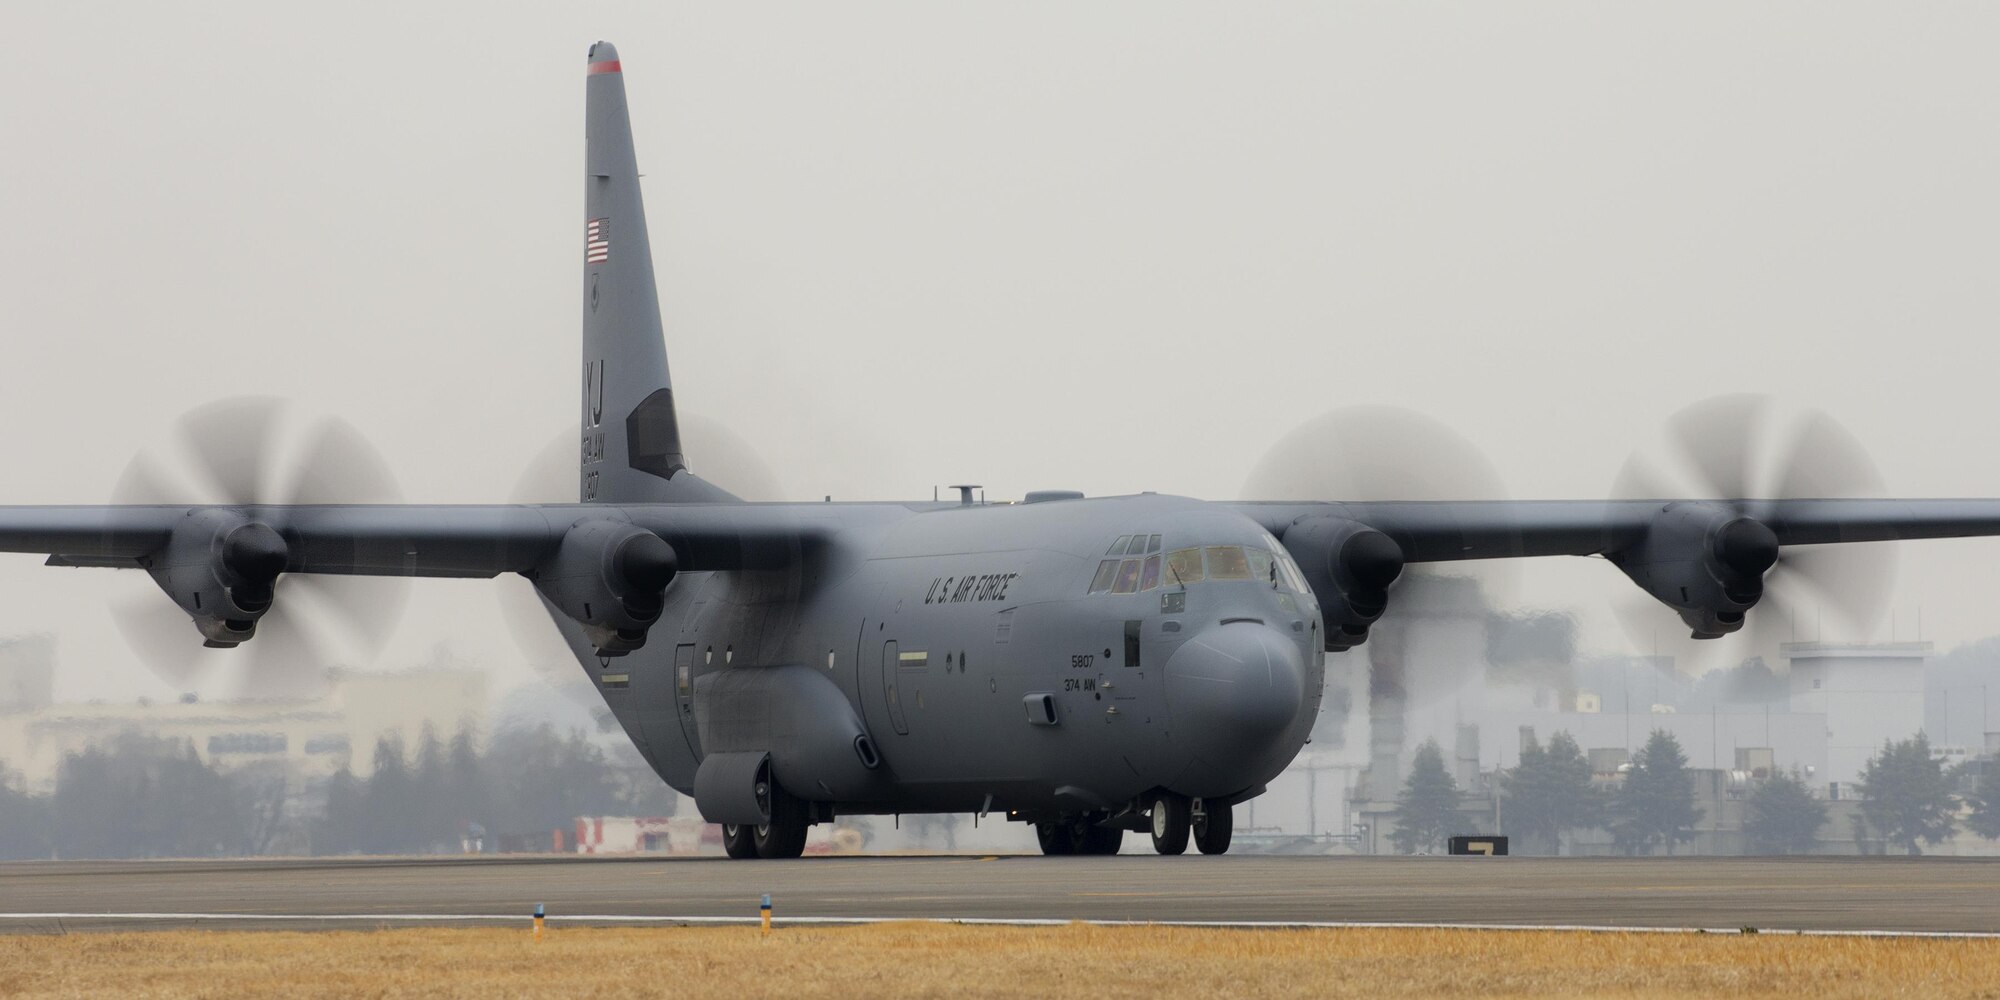 A C-130J Super Hercules taxies down a runway at Yokota Air Base, Japan, March 6, 2017. This is the first C-130J to be assigned to Pacific Air Forces. Yokota serves as the primary Western Pacific airlift hub for U.S. Air Force peacetime and contingency operations. Missions include tactical air land, airdrop, aeromedical evacuation, special operations and distinguished visitor airlift. (U.S. Air Force photo by Yasuo Osakabe)